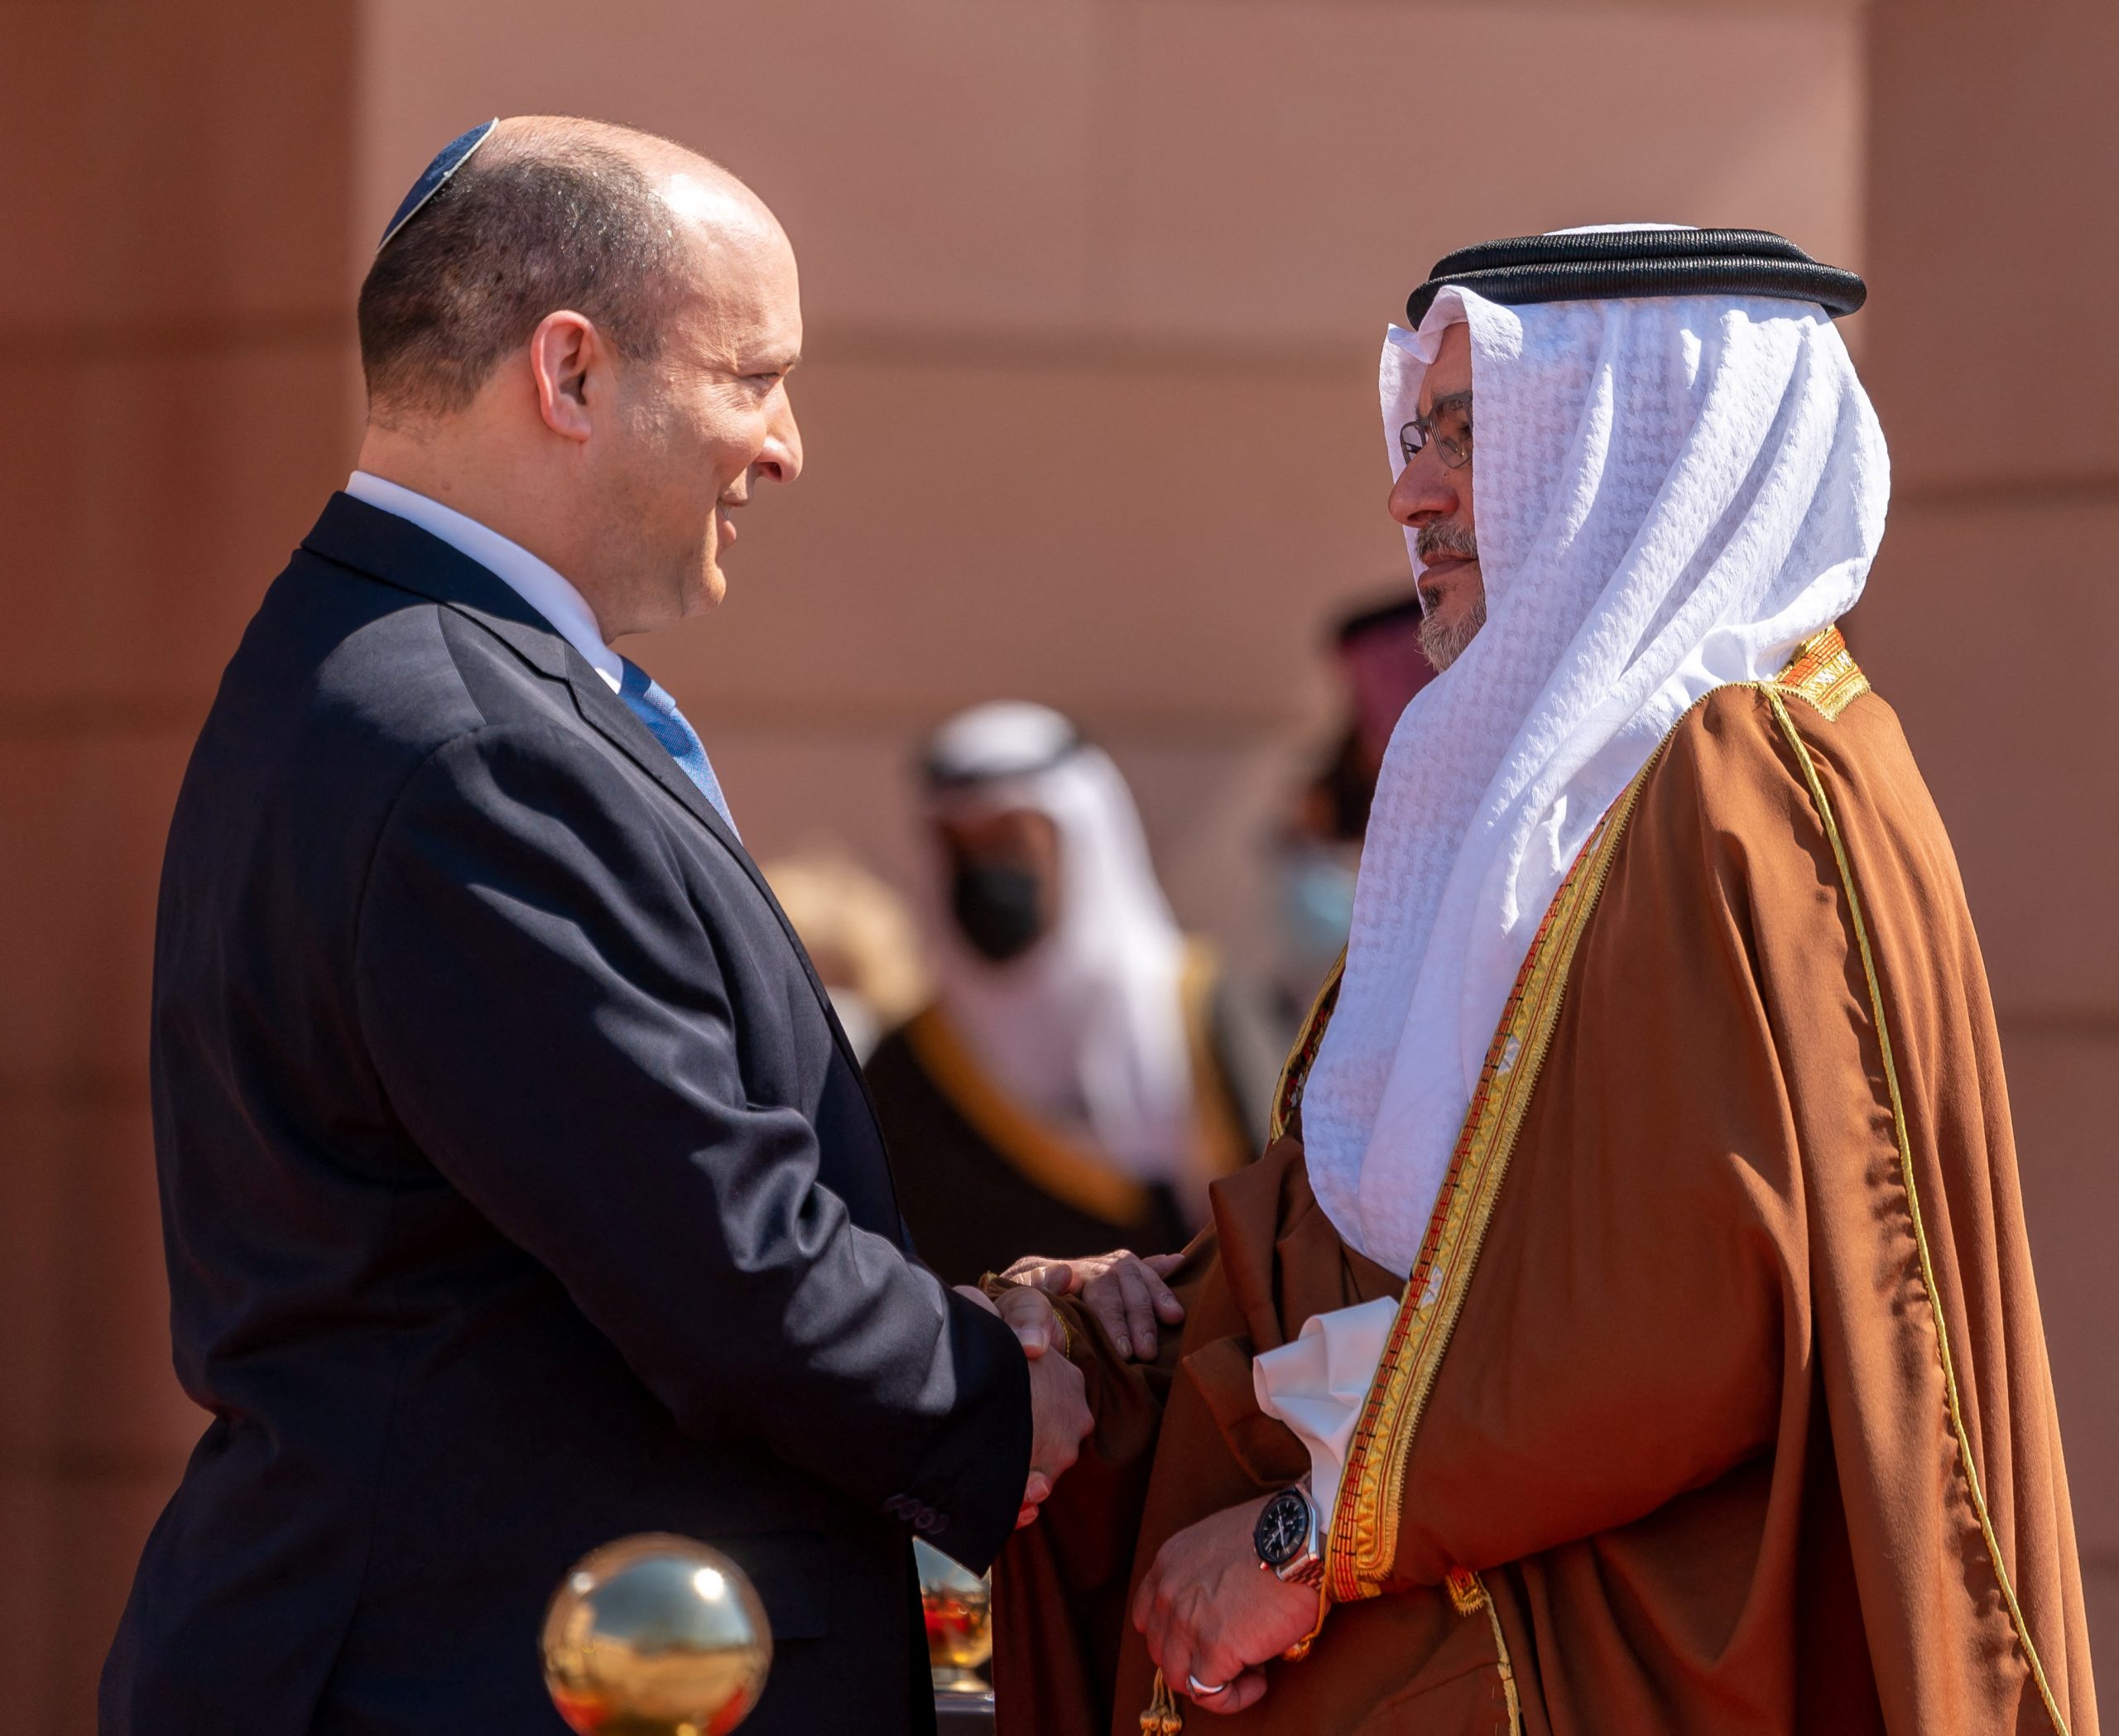 Following a meeting between Israeli Prime Minister Naftali Bennett met with Bahrain’s King Hamad bin Isa Al Khalifa in Manama on Tuesday, Israel agreed to supply natural gas to Egypt from a new route via Jordan.